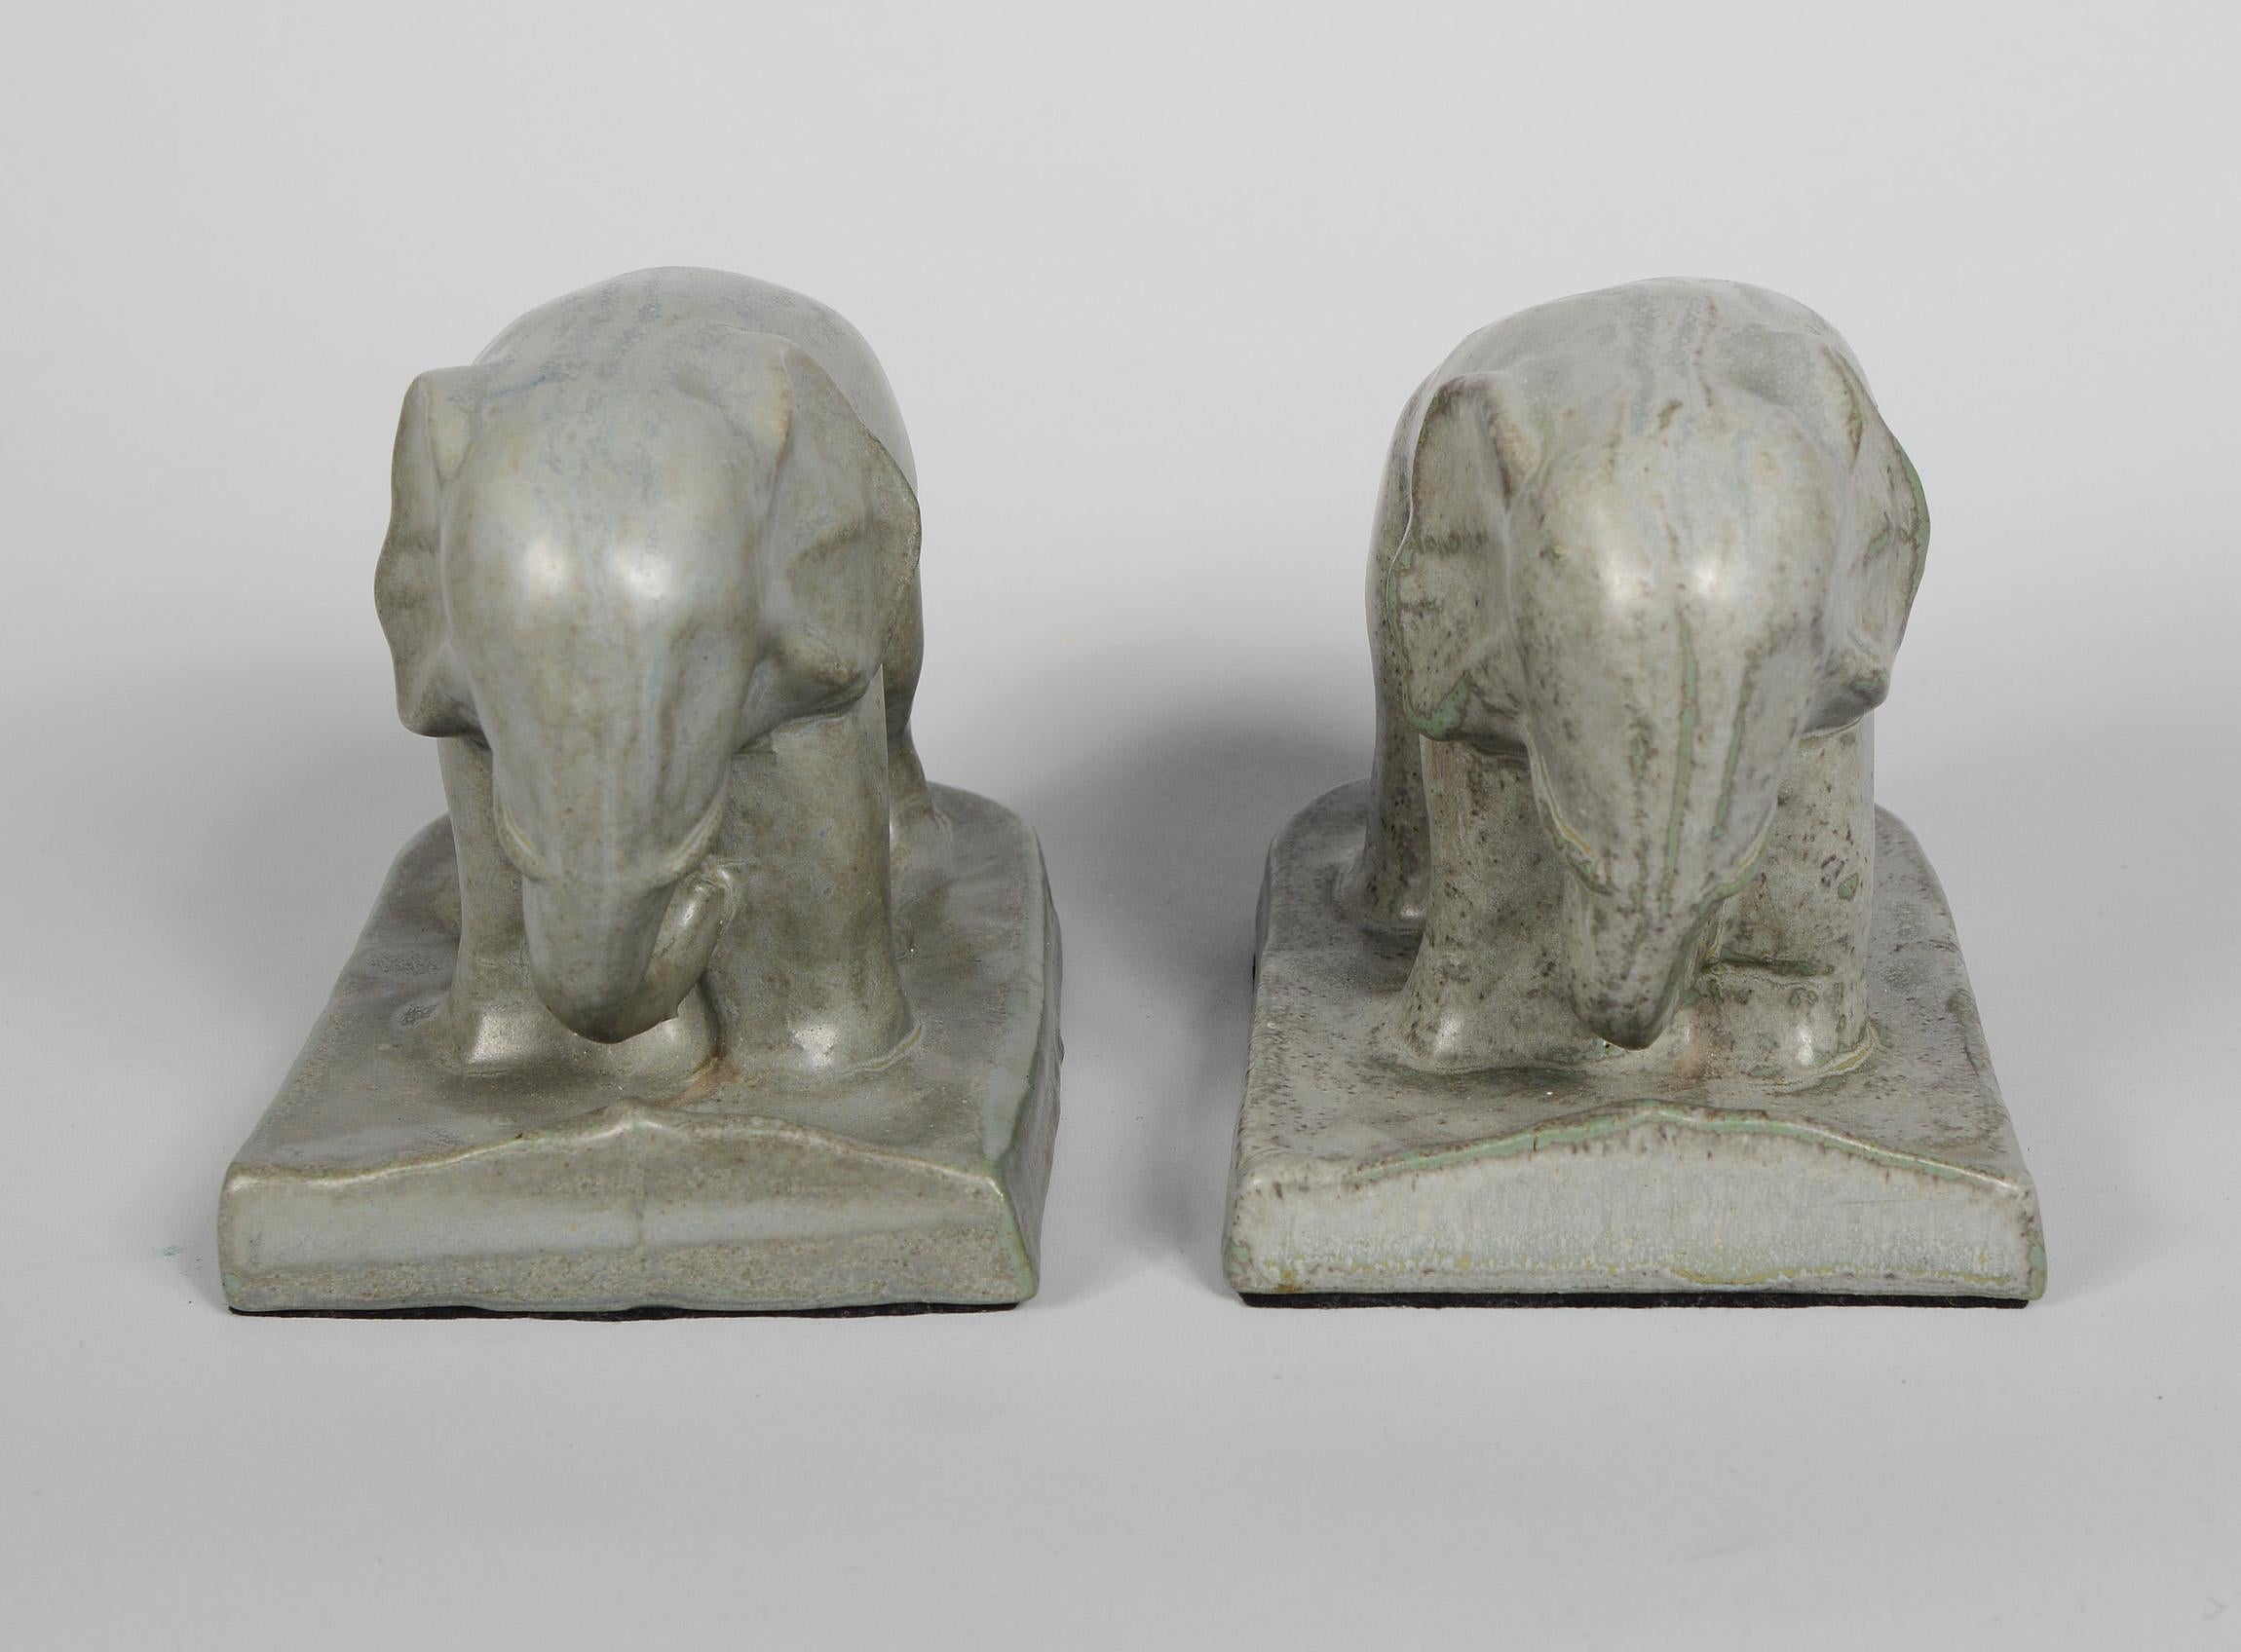 Pair of Arts and Crafts Pottery Elephant Bookends